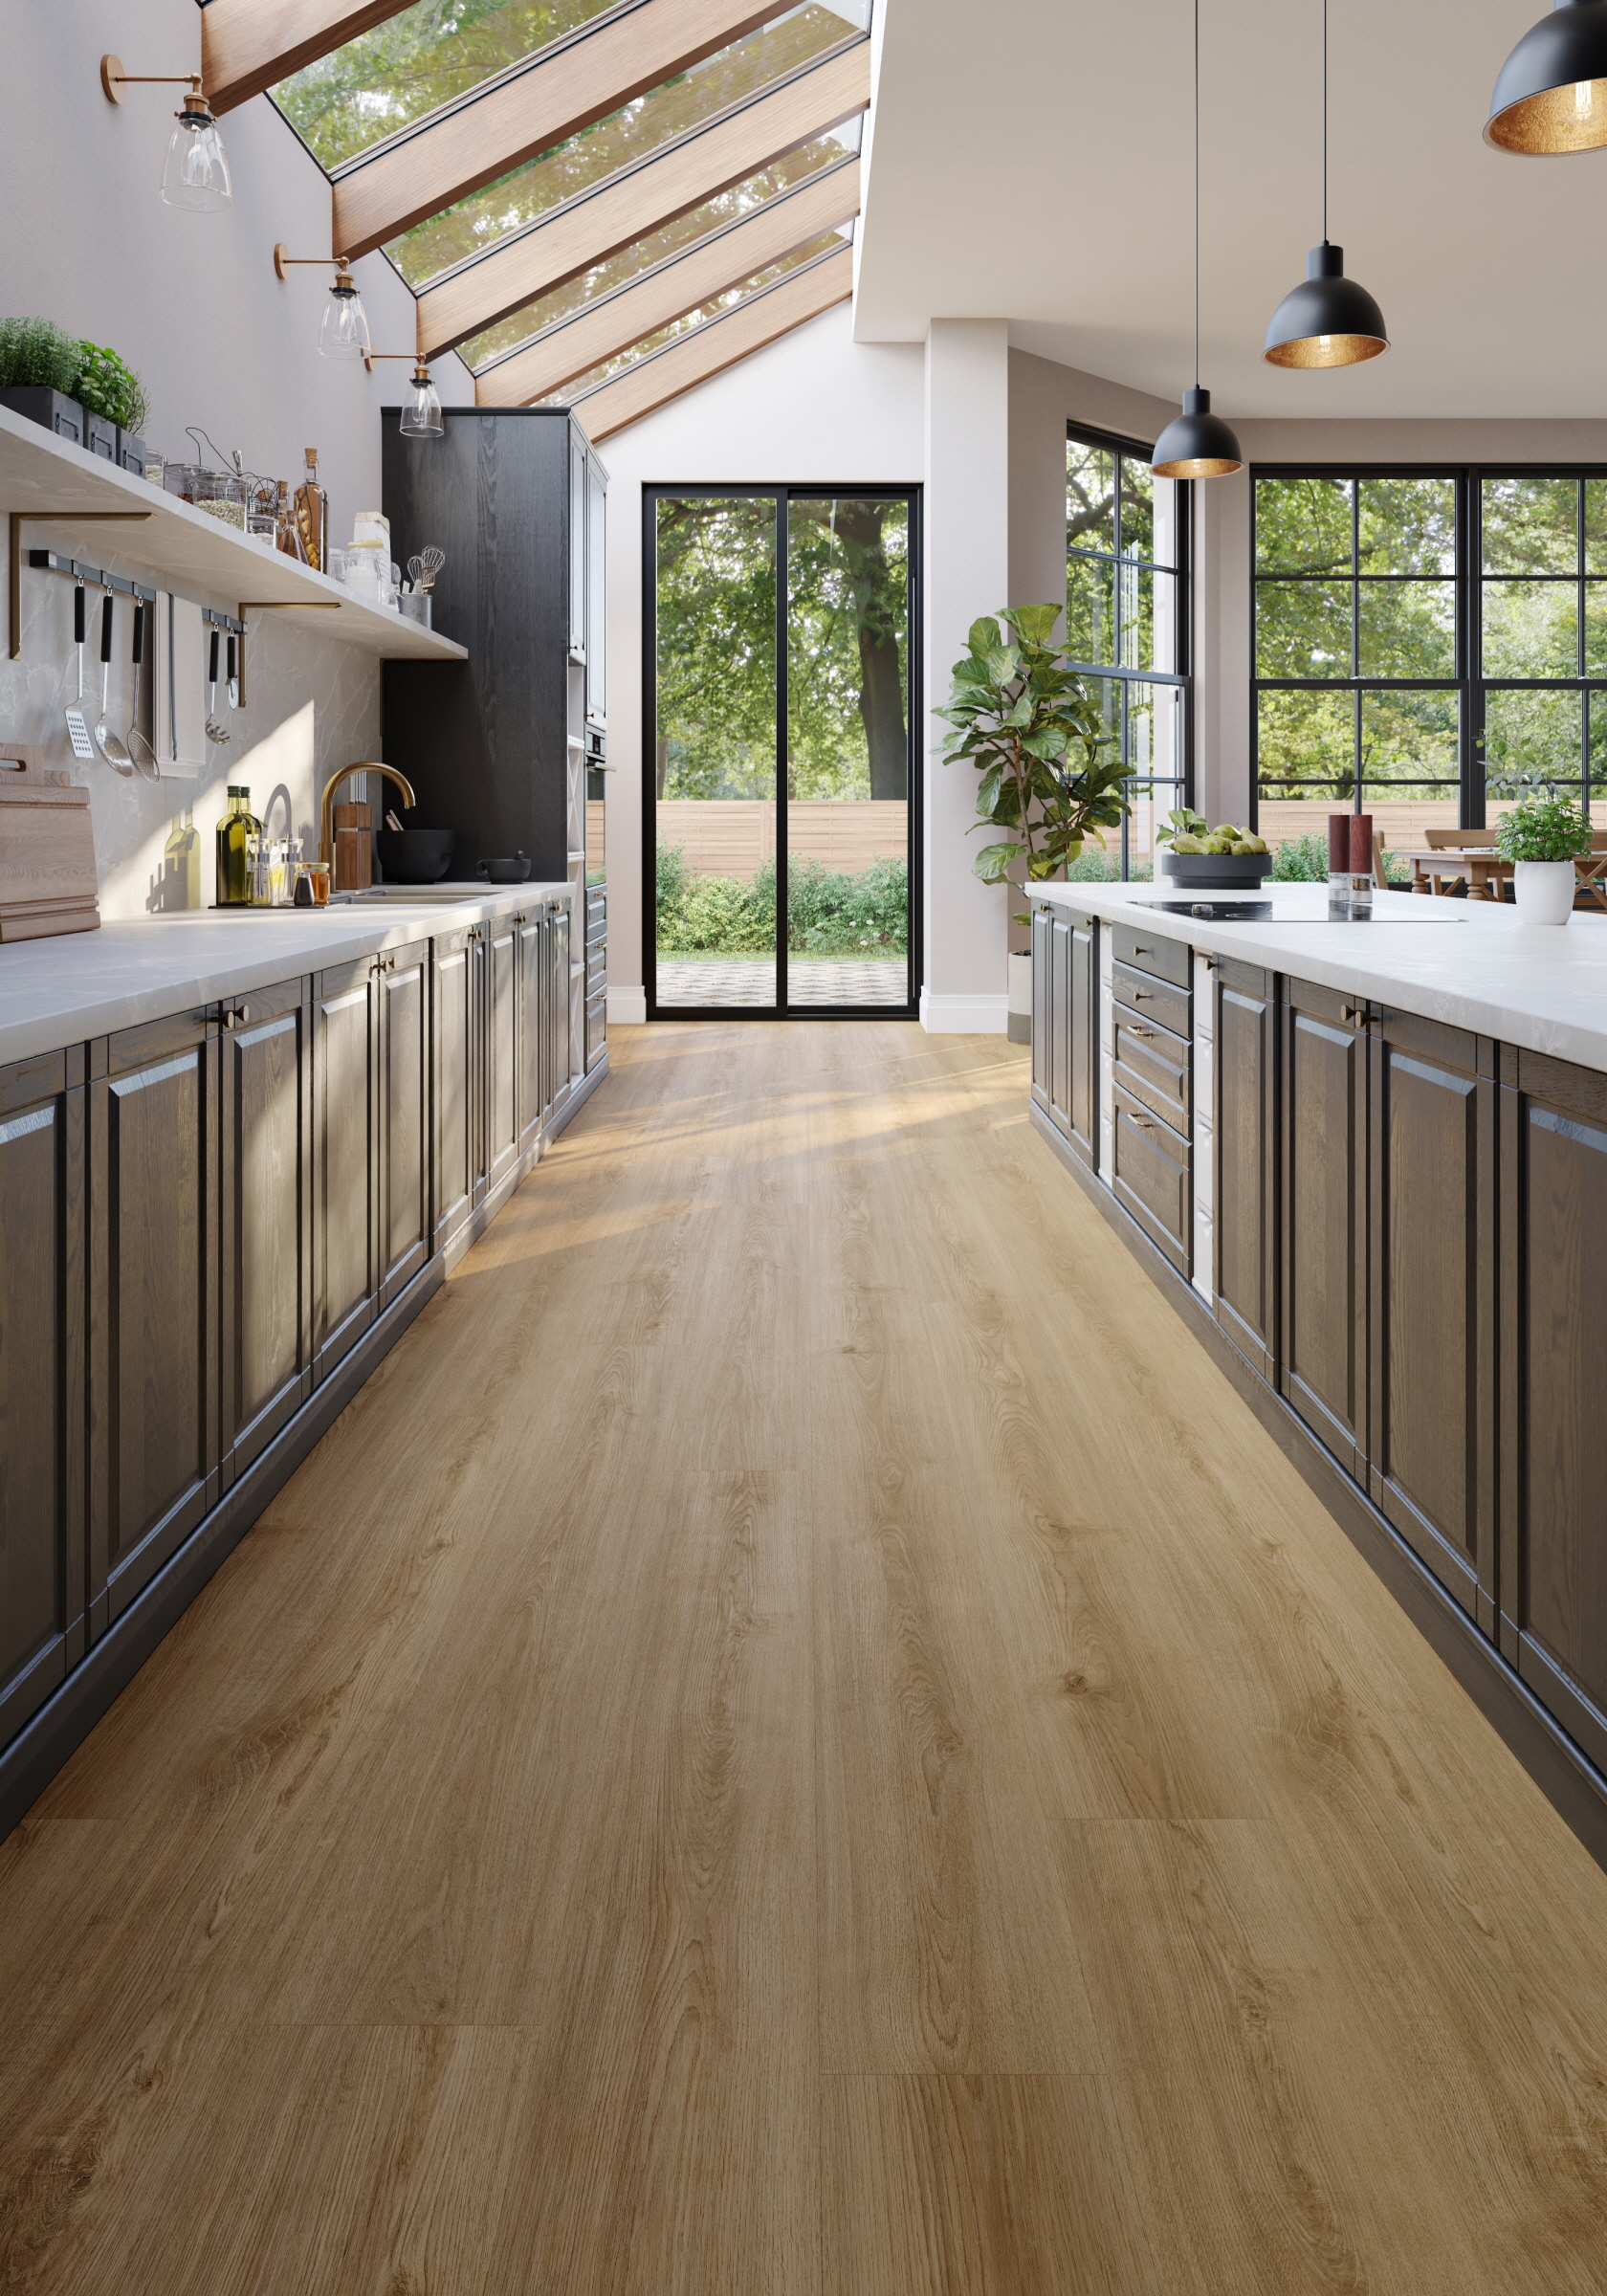 LX Hausys HFLOR - European Oak paves a refined color dimension for the beige and almond-based naturals